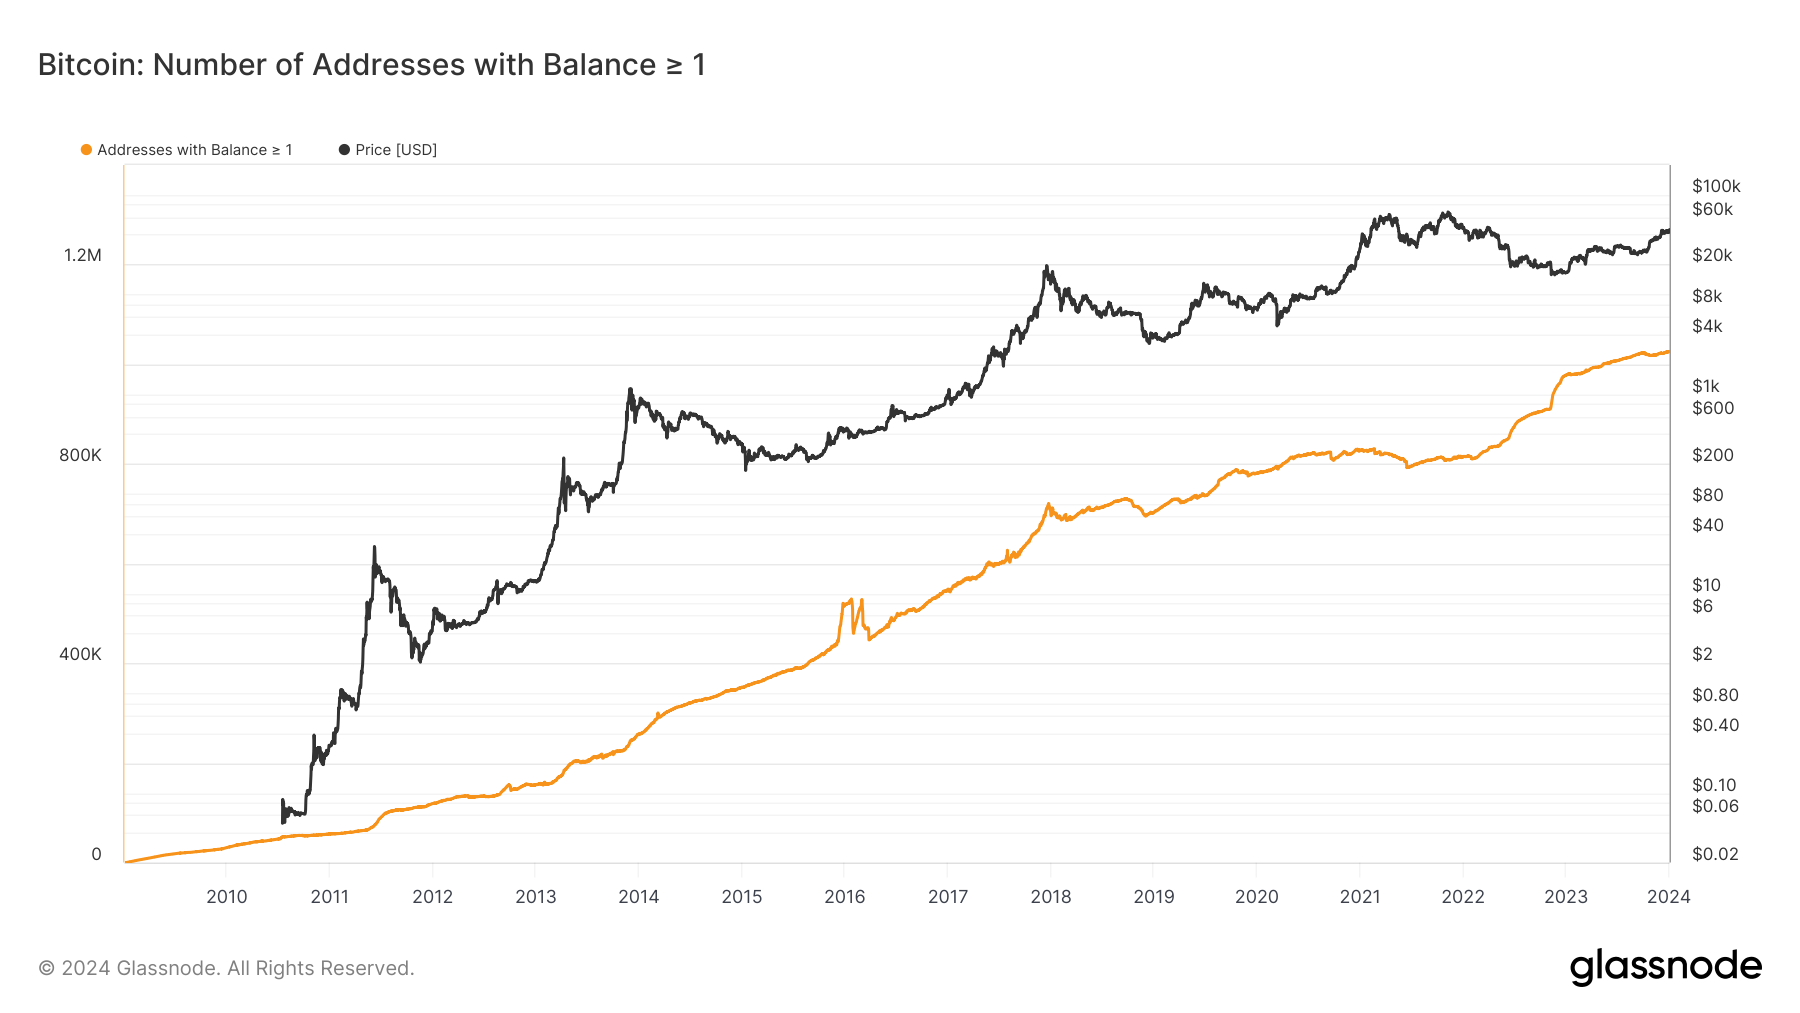 Bitcoin addresses with a balance of 1BTC or more